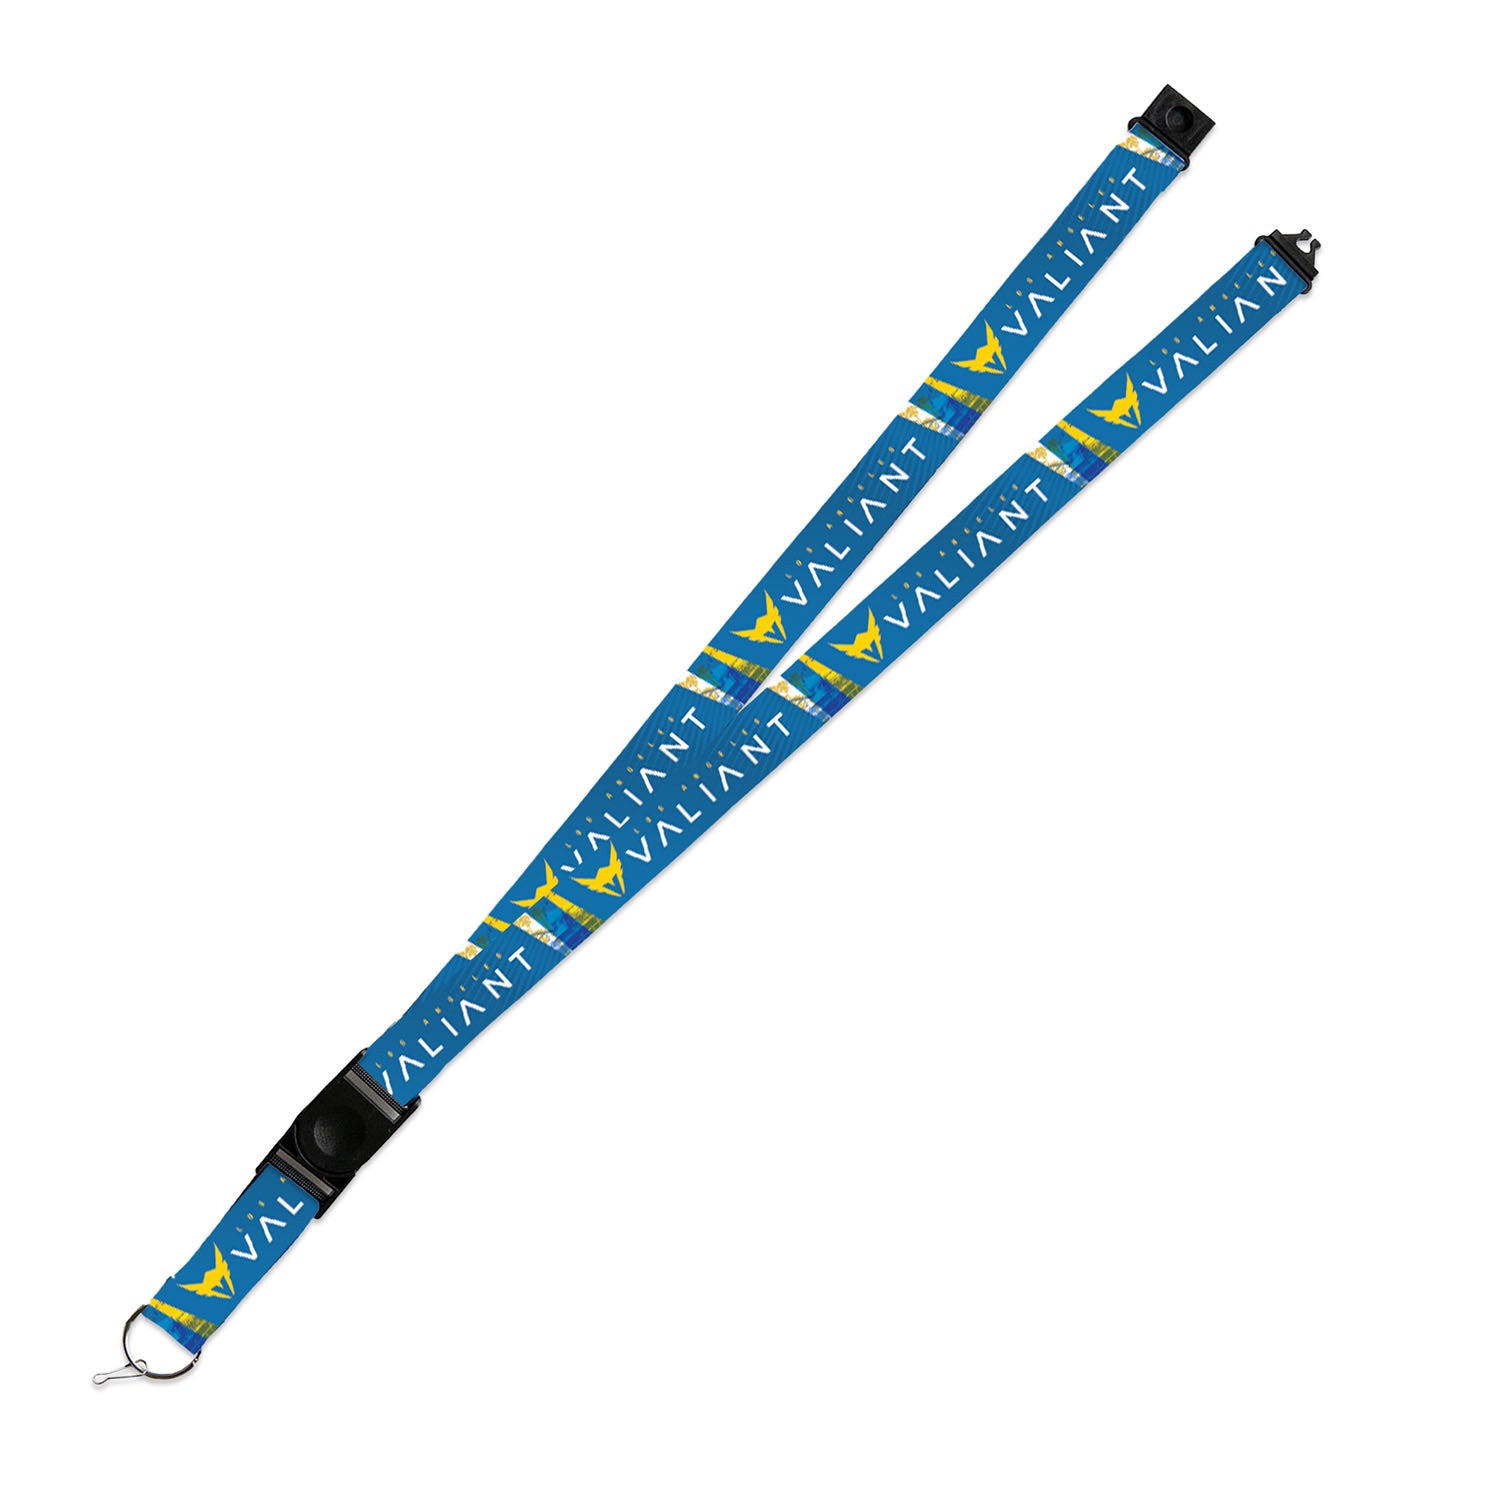 Los Angeles Valiant Lanyard in Blue - Front View